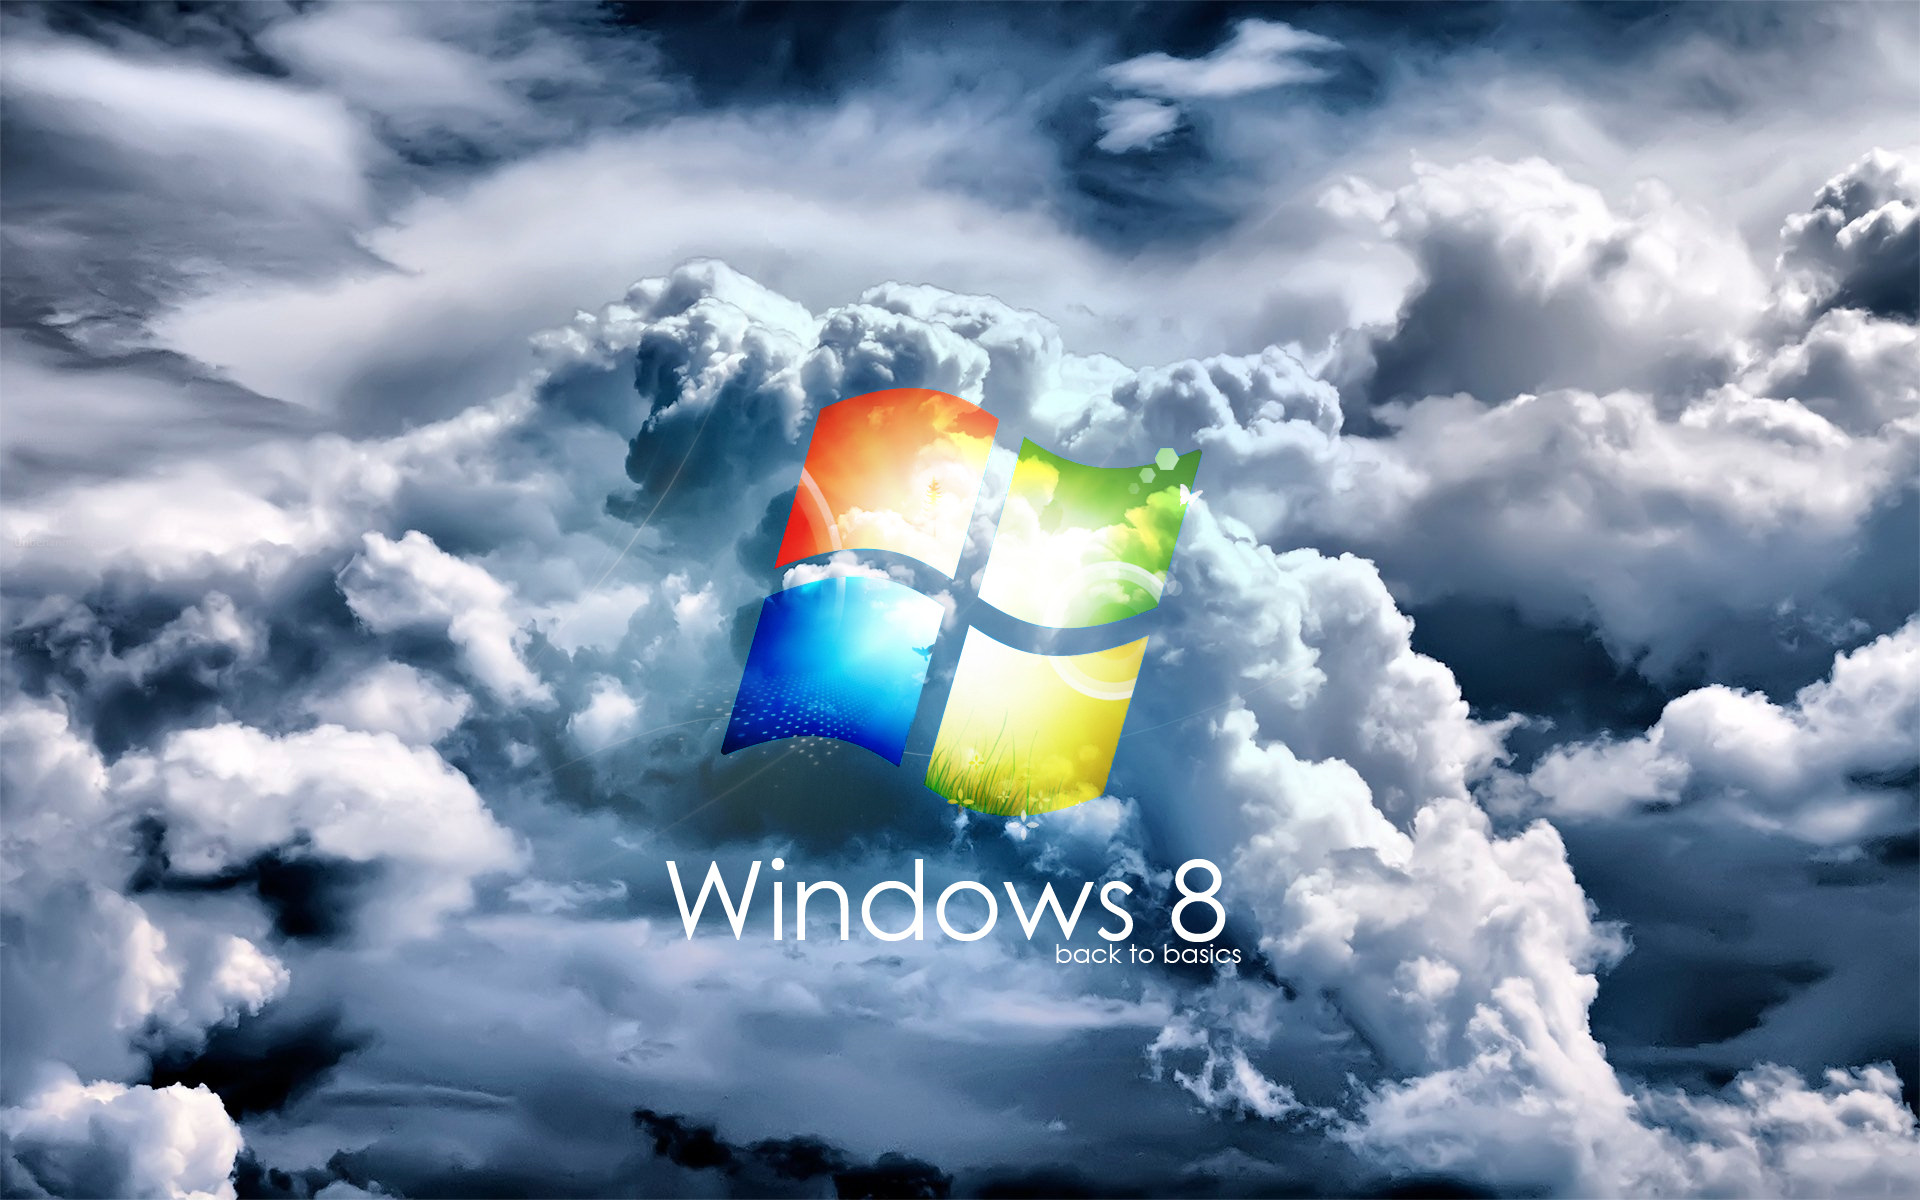 Windows 8 Backgrounds – High resolution wallpapers for your PC